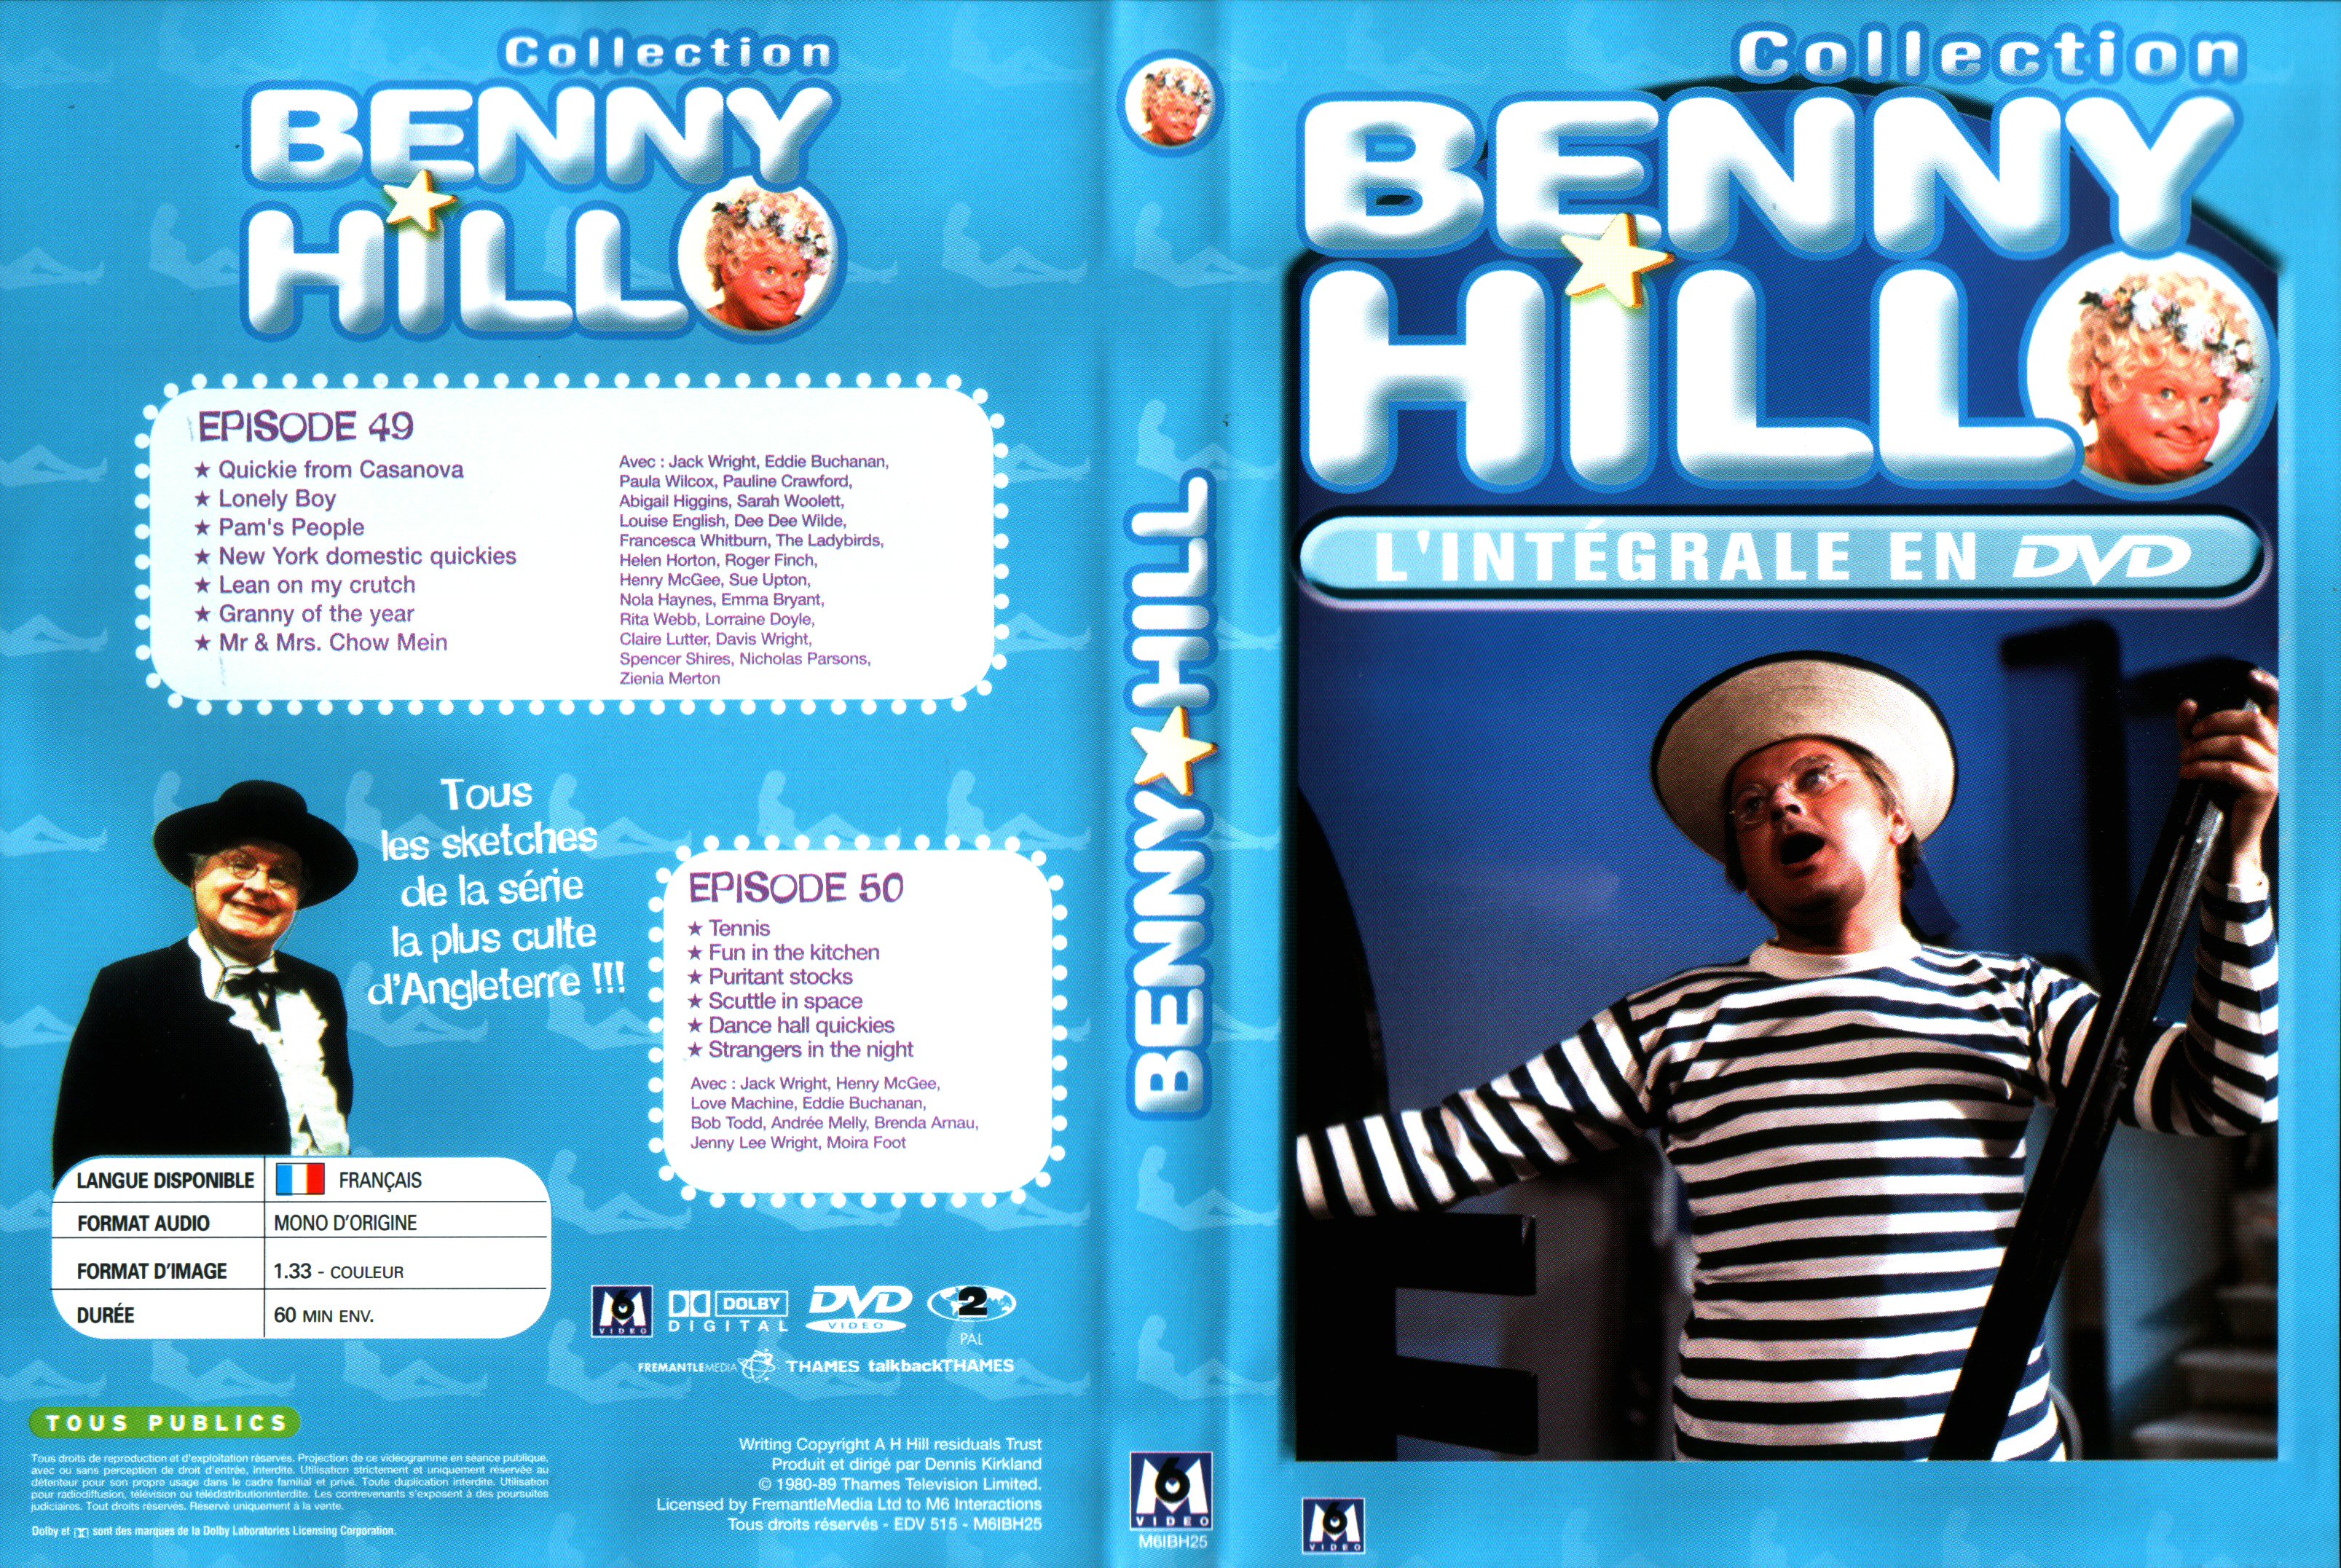 Jaquette DVD Benny Hill collection Episodes 49-50